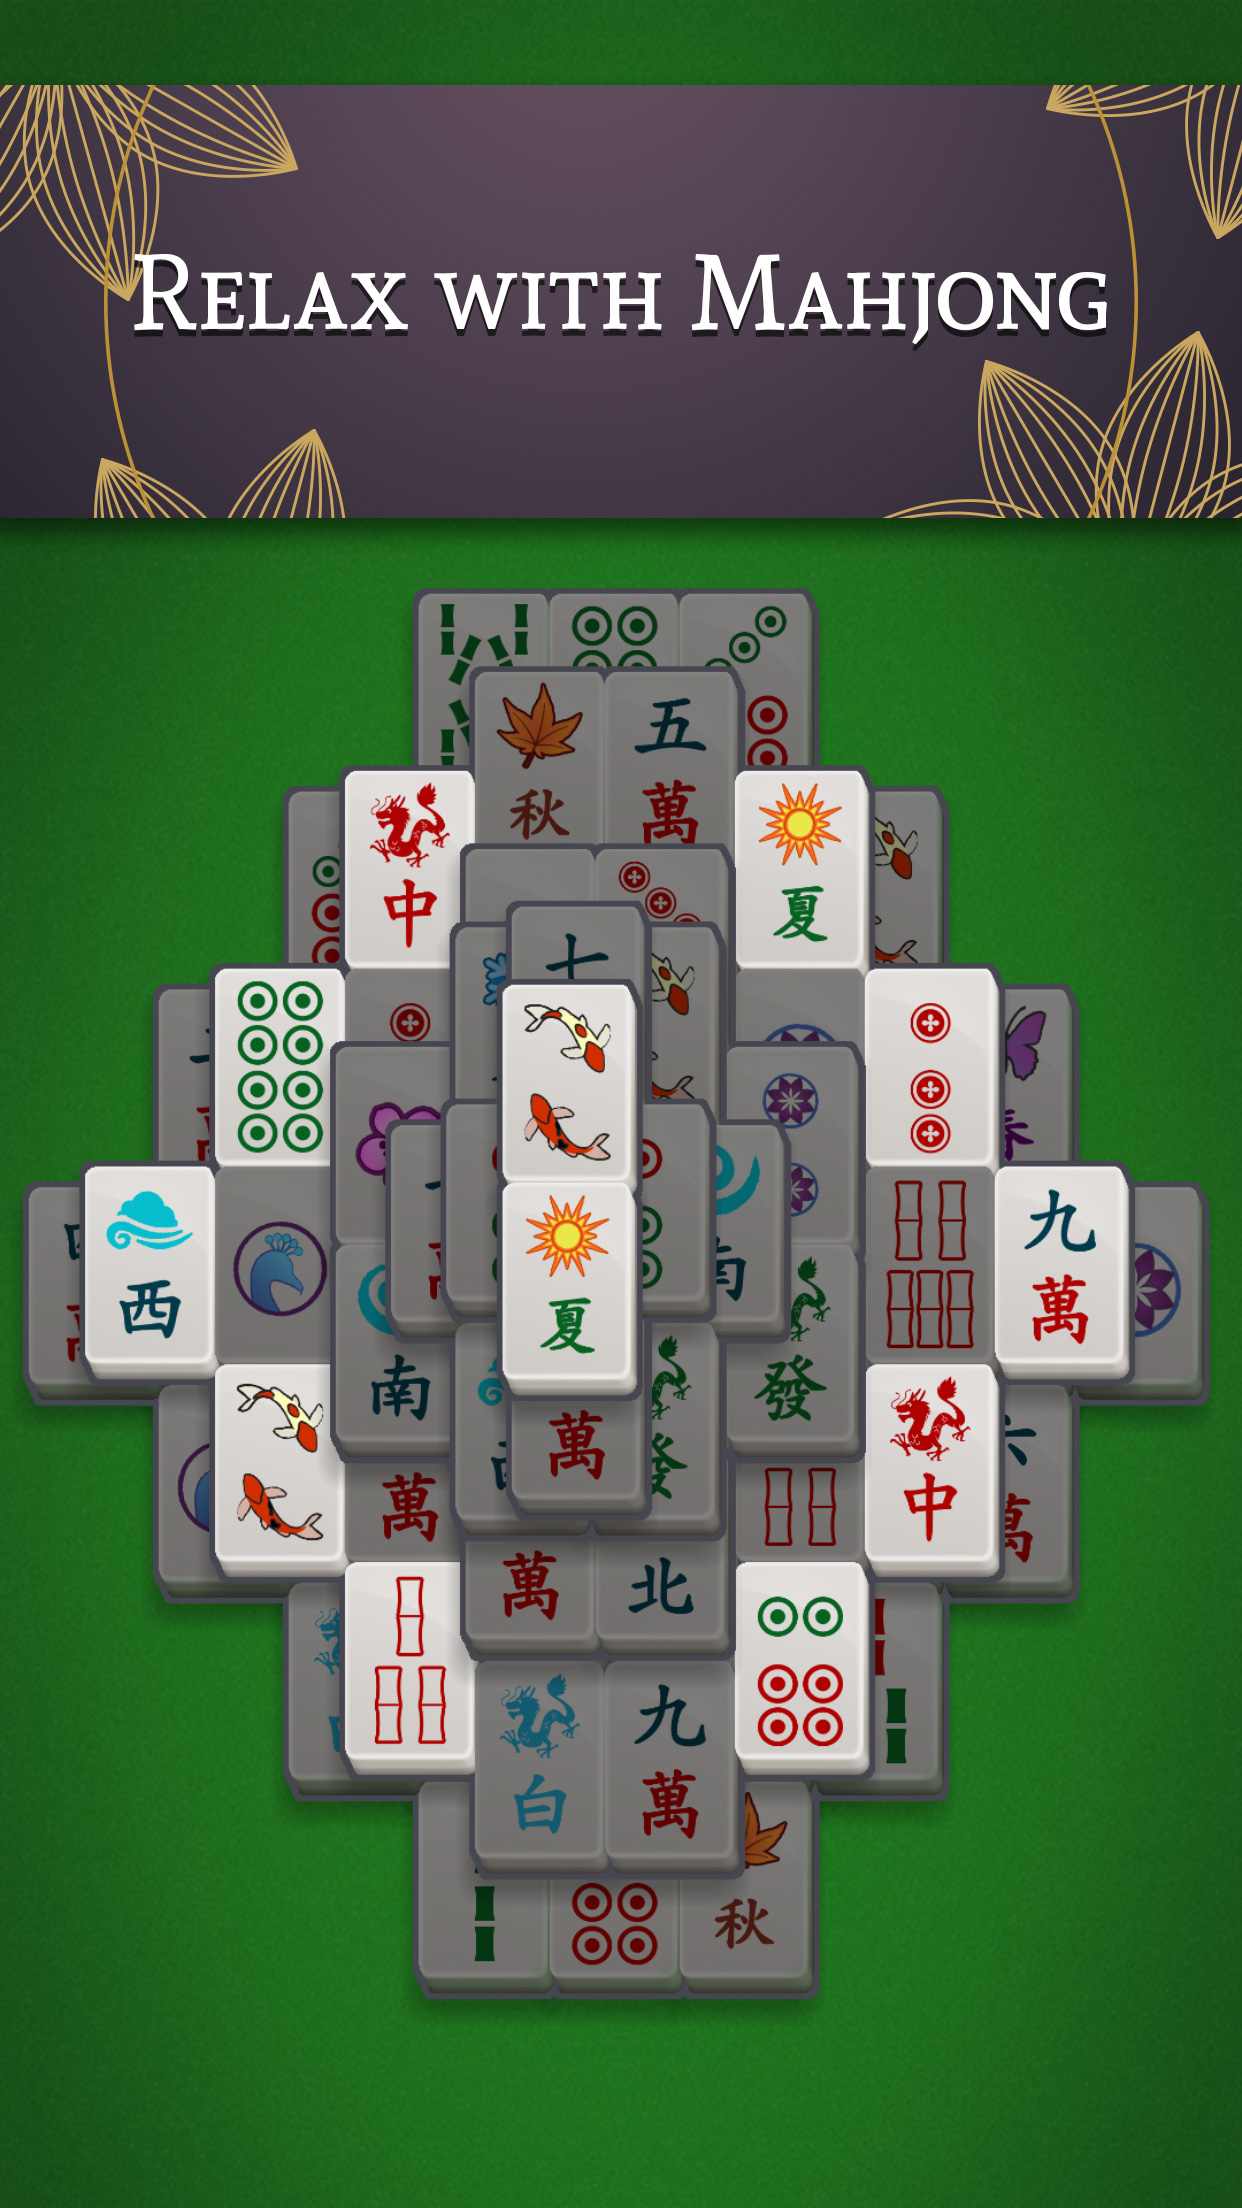 Mahjong Solitaire APK 1.8.1.1155 for Android – Download Mahjong Solitaire  APK Latest Version from APKFab.com